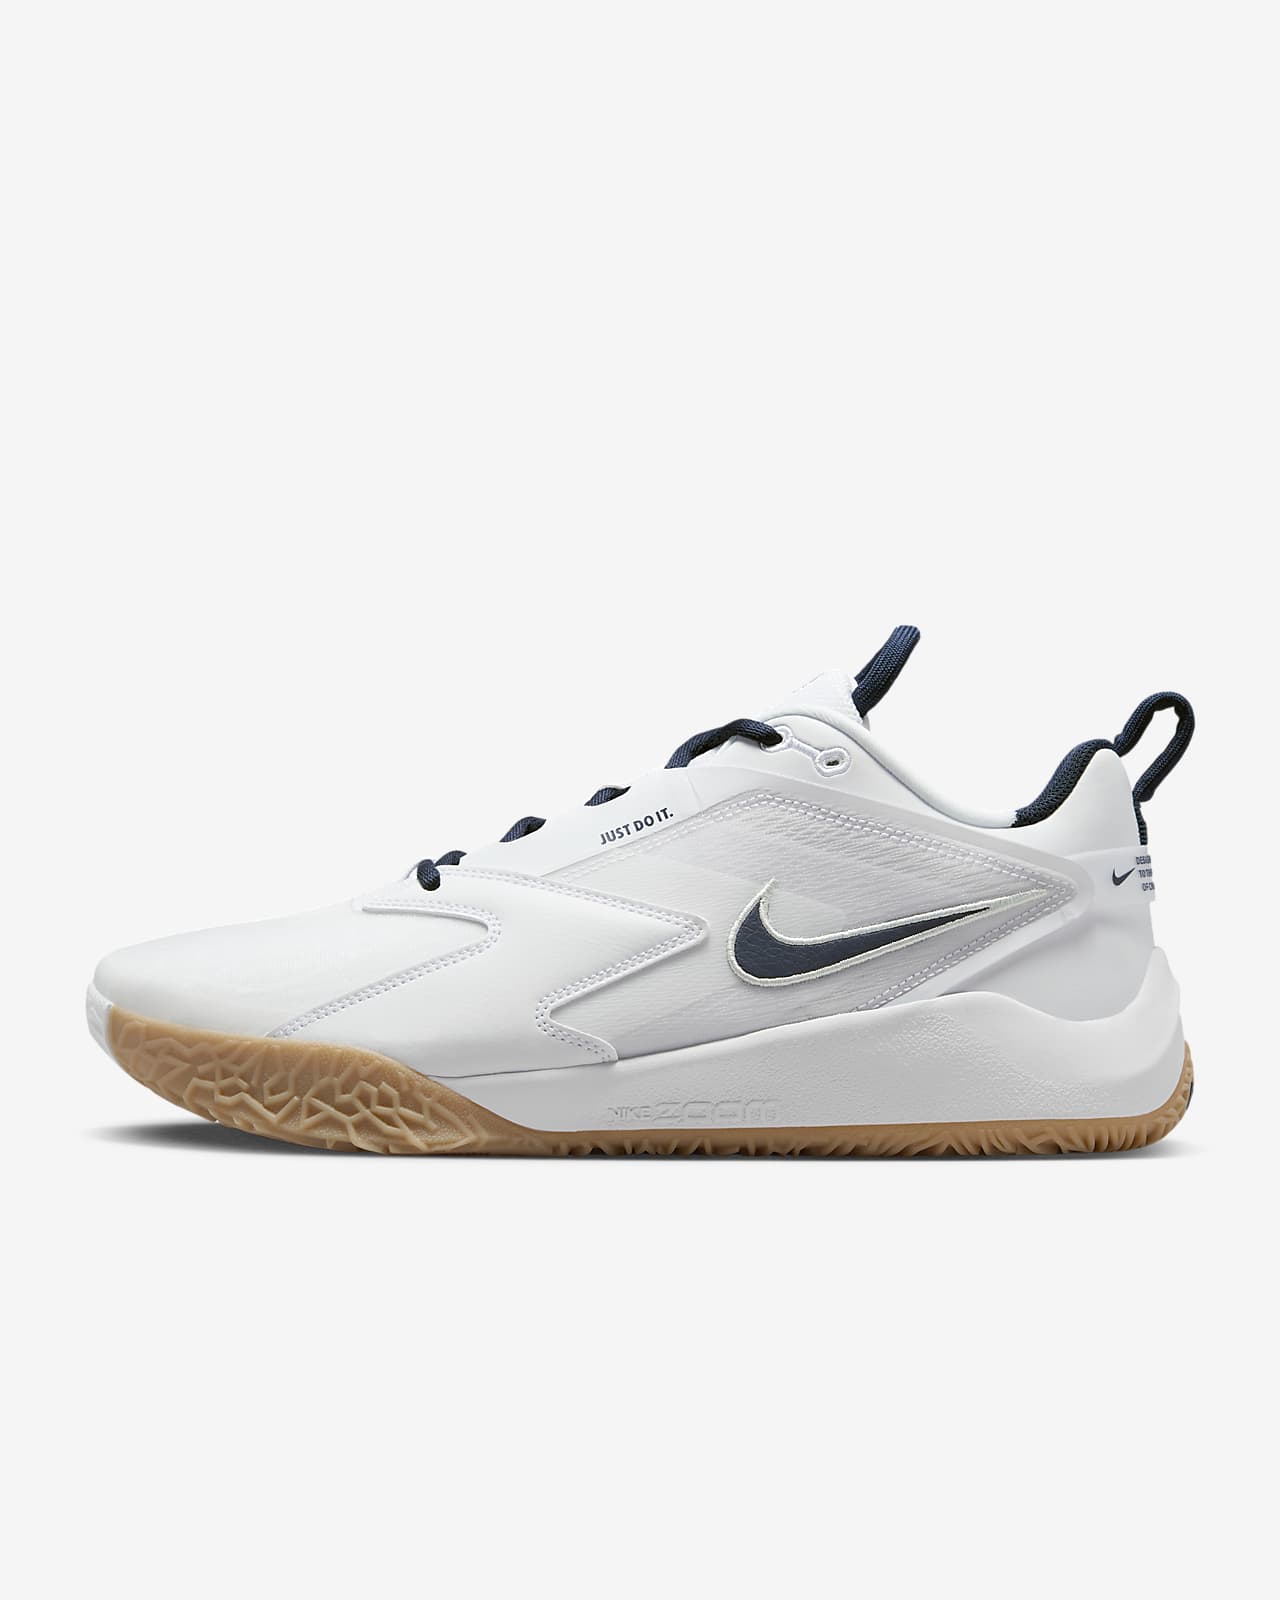 Nike HyperAce 3 Volleyball Shoes